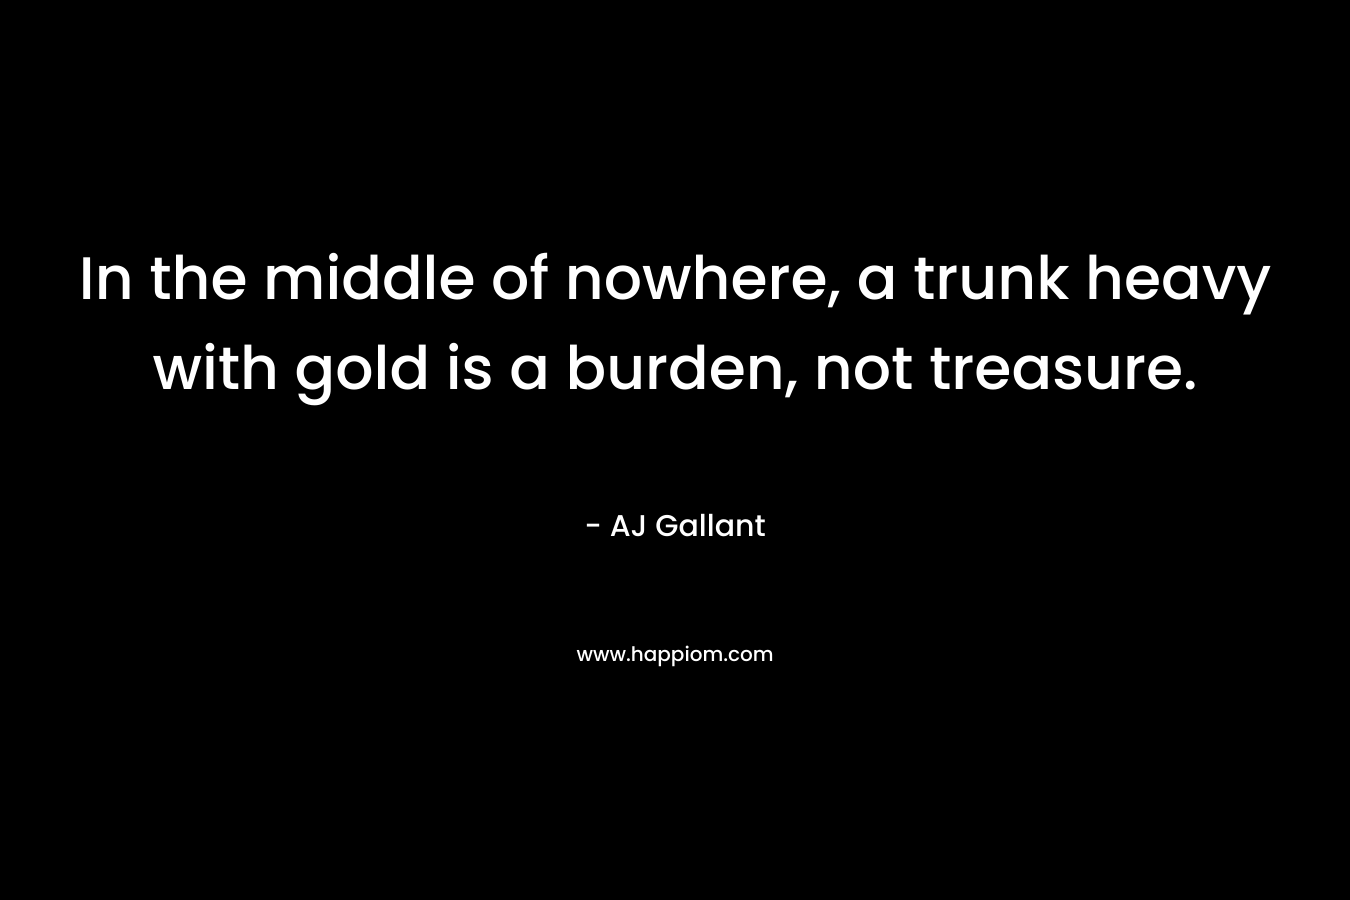 In the middle of nowhere, a trunk heavy with gold is a burden, not treasure. – AJ Gallant